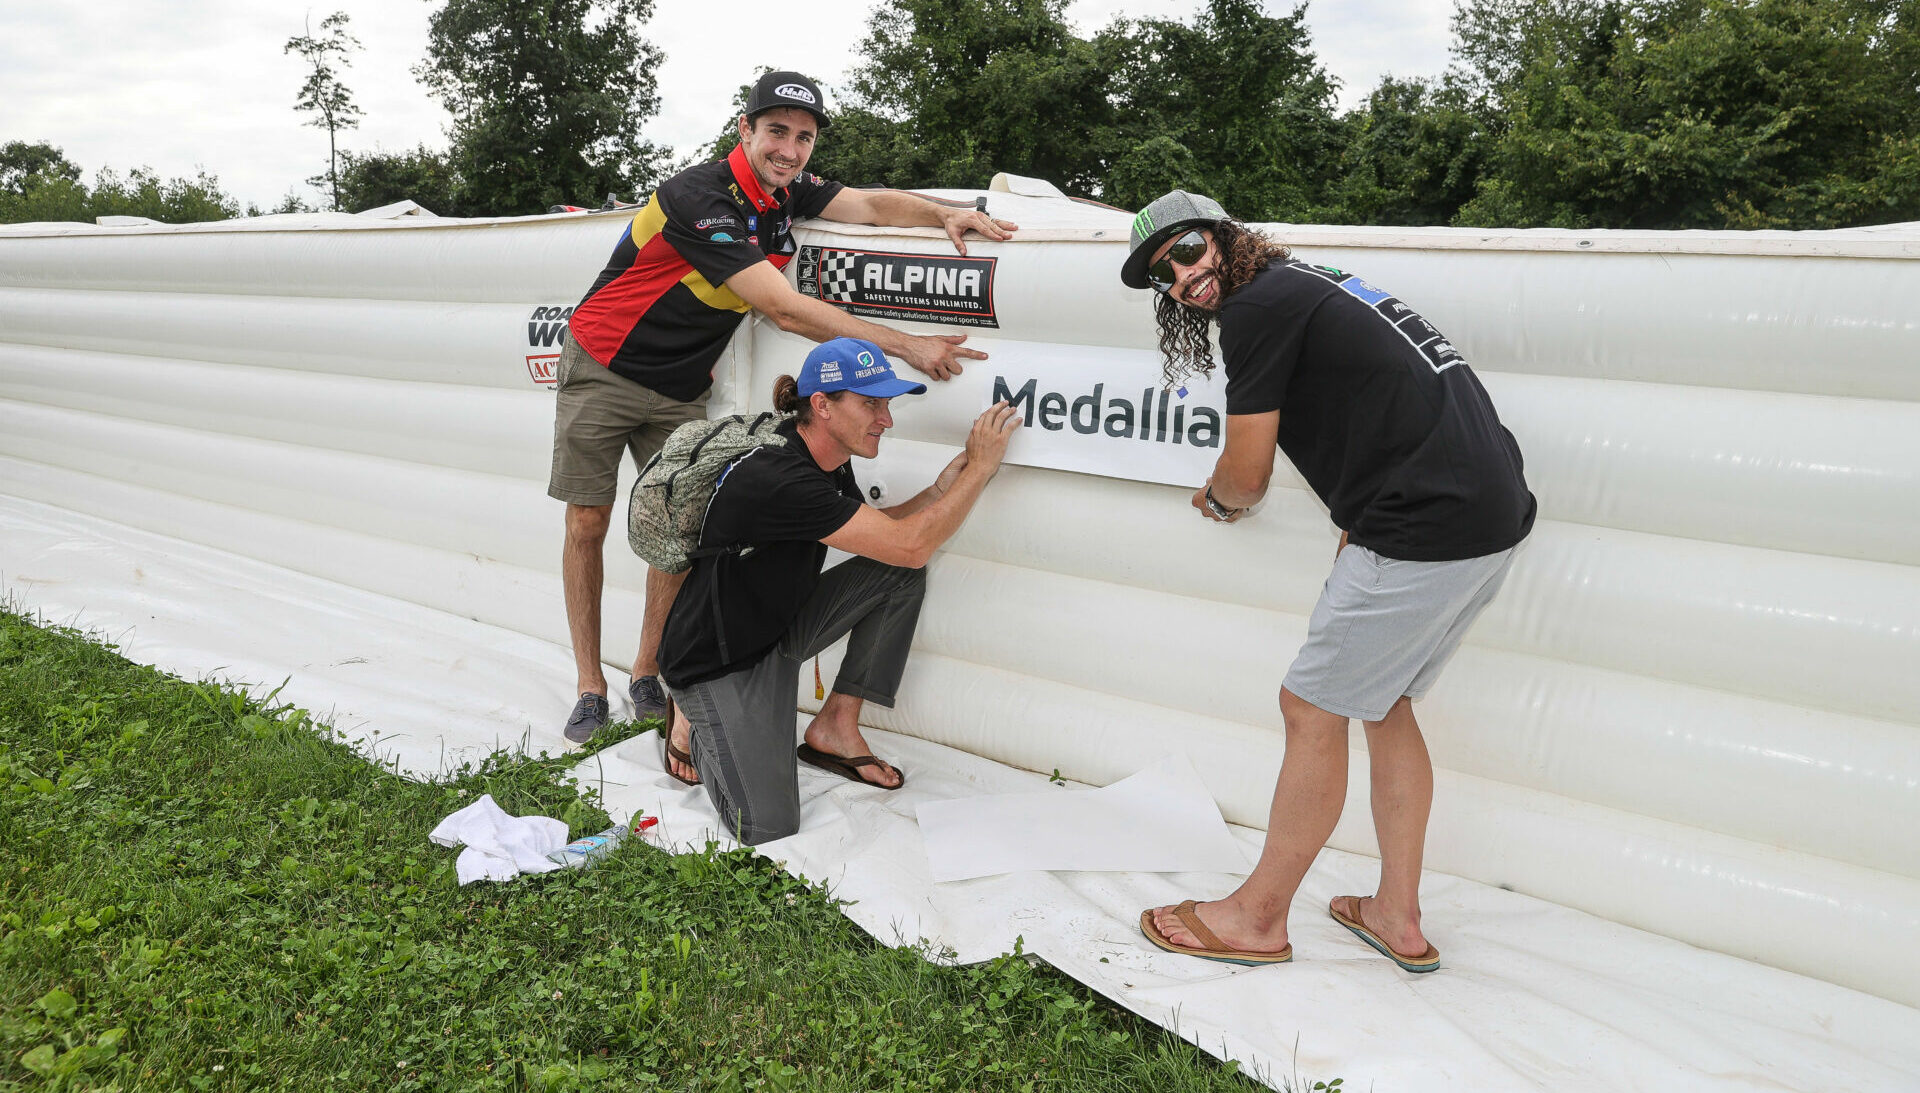 Medallia Superbike riders Mathew Scholtz (left), Jake Gagne (center), and JD Beach (right) installing a Medallia logo on a new section of soft barriers funded by Medallia. Photo by Brian J. Nelson.